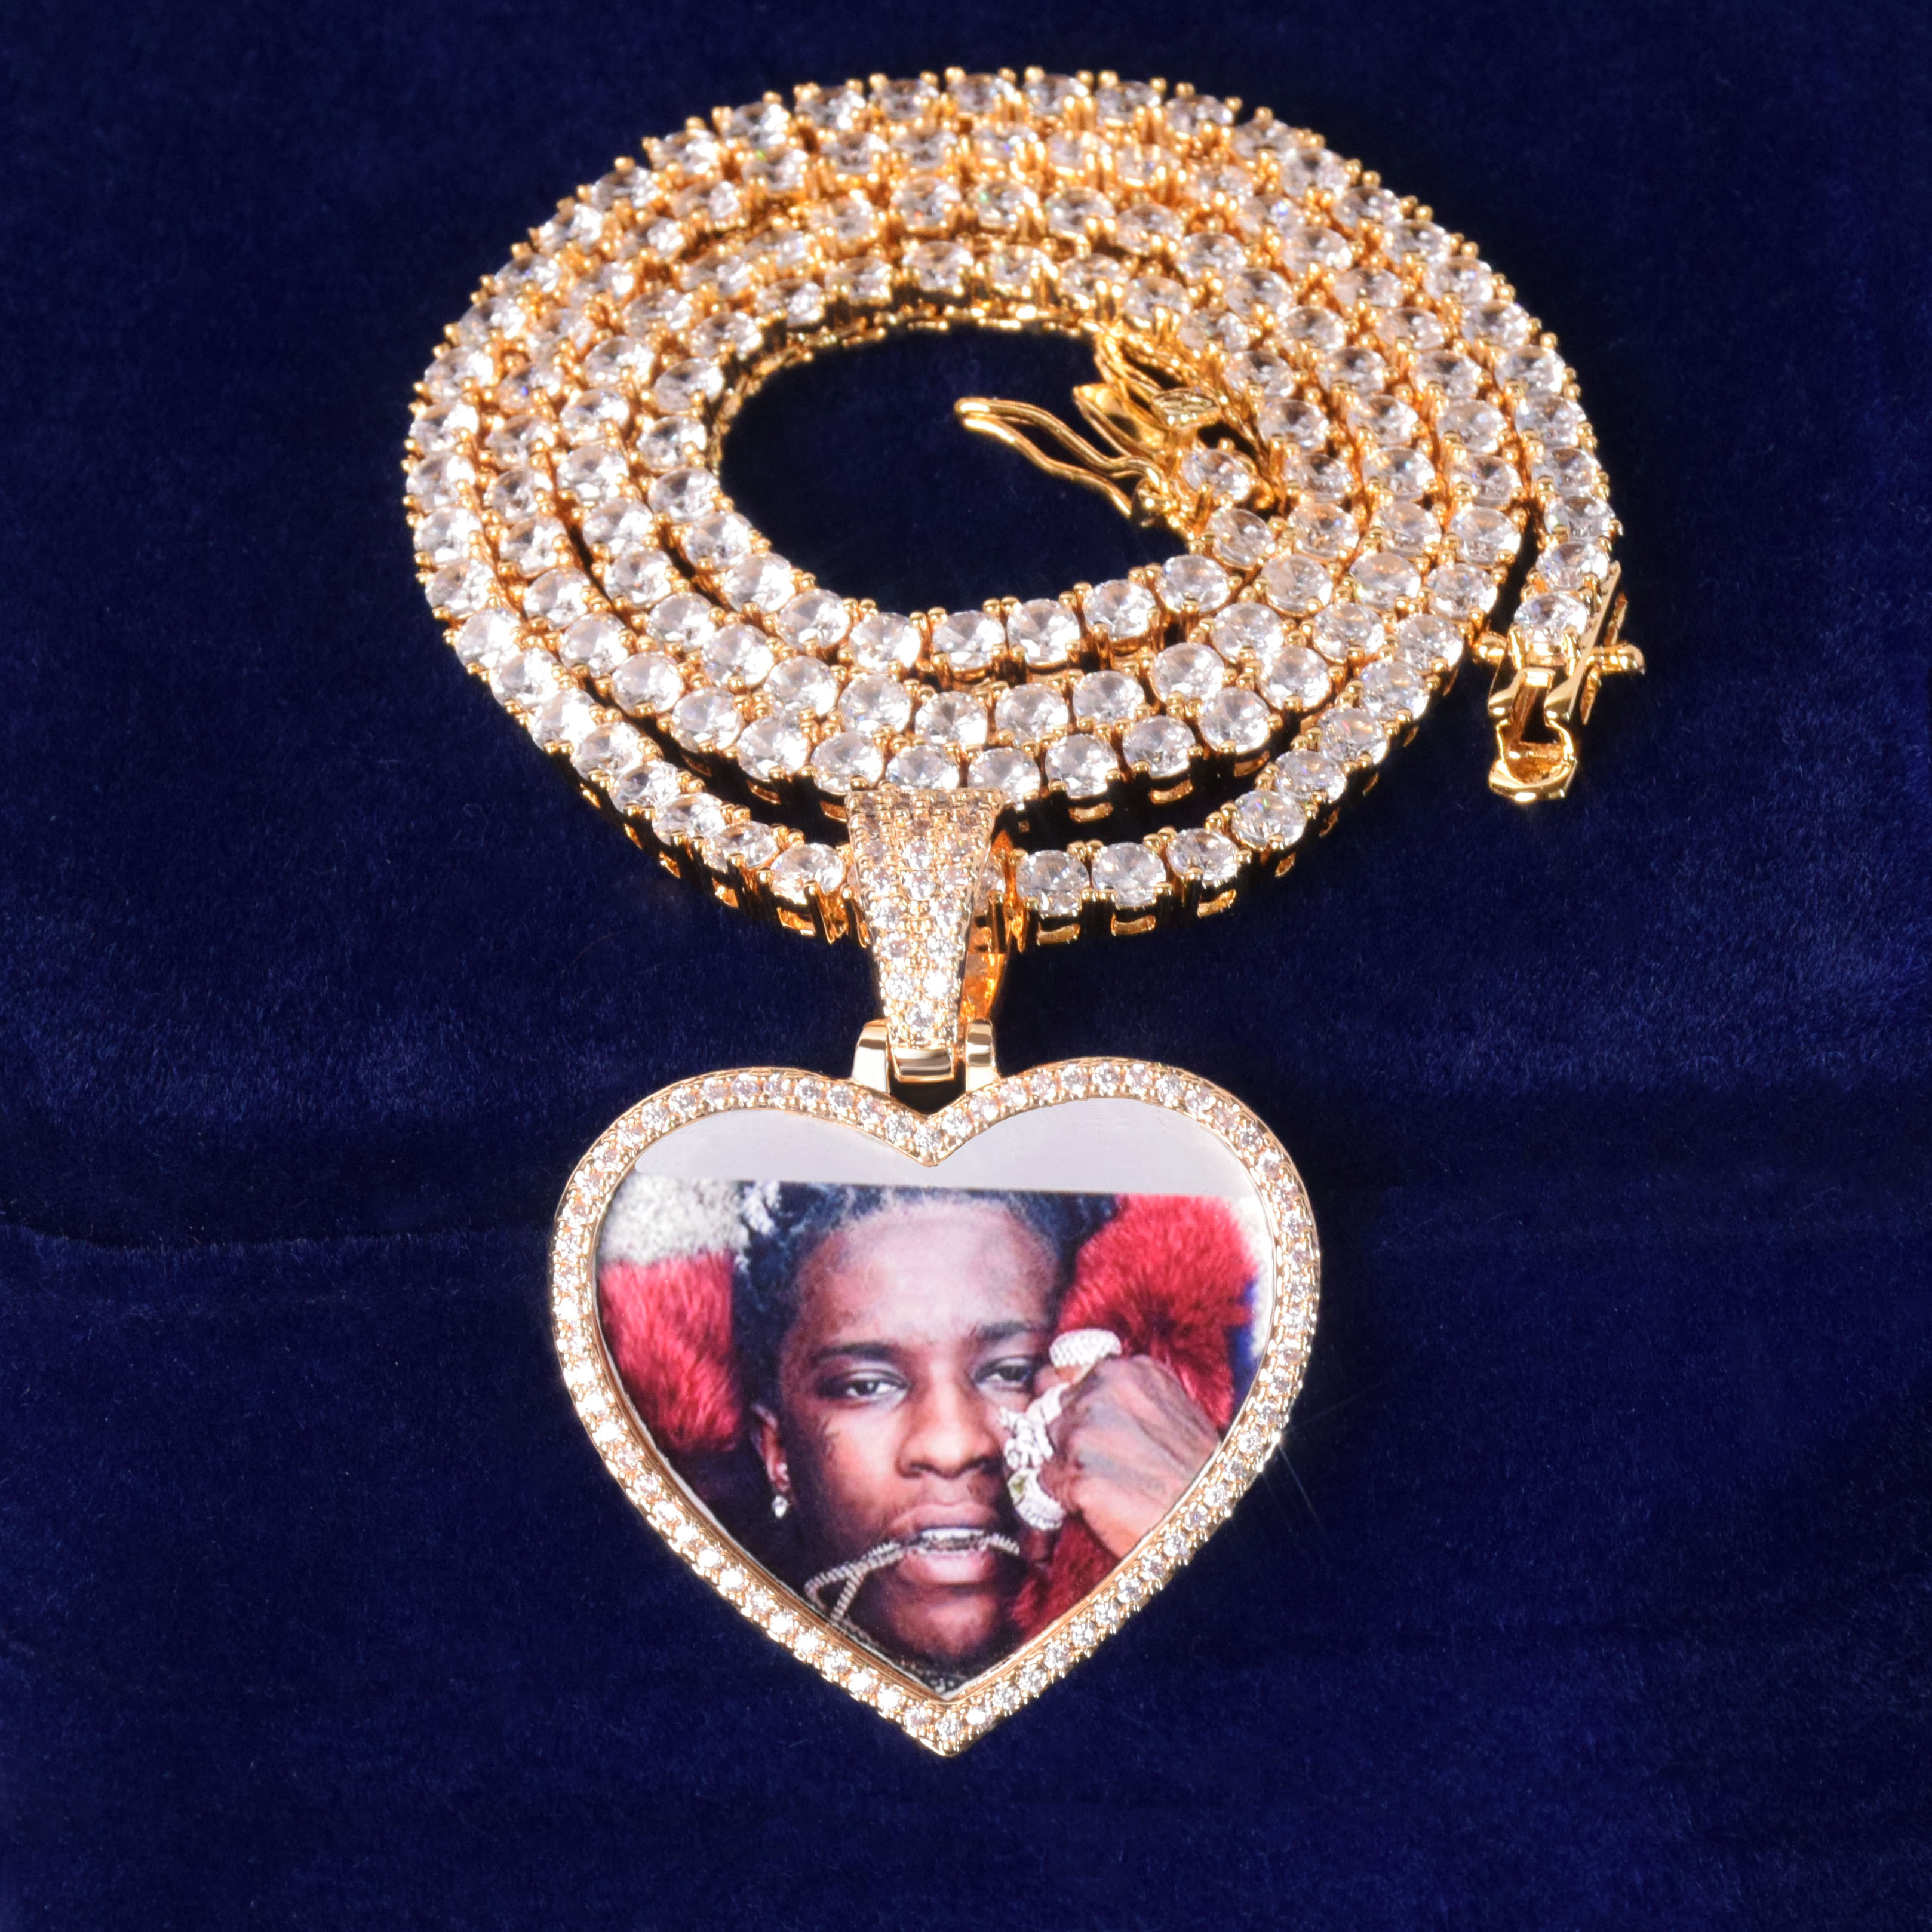 Custom Made Photo Heart Medallions Necklace & Pendant Solid back Gold Color AAA Zircon Men's Hip hop Jewelry